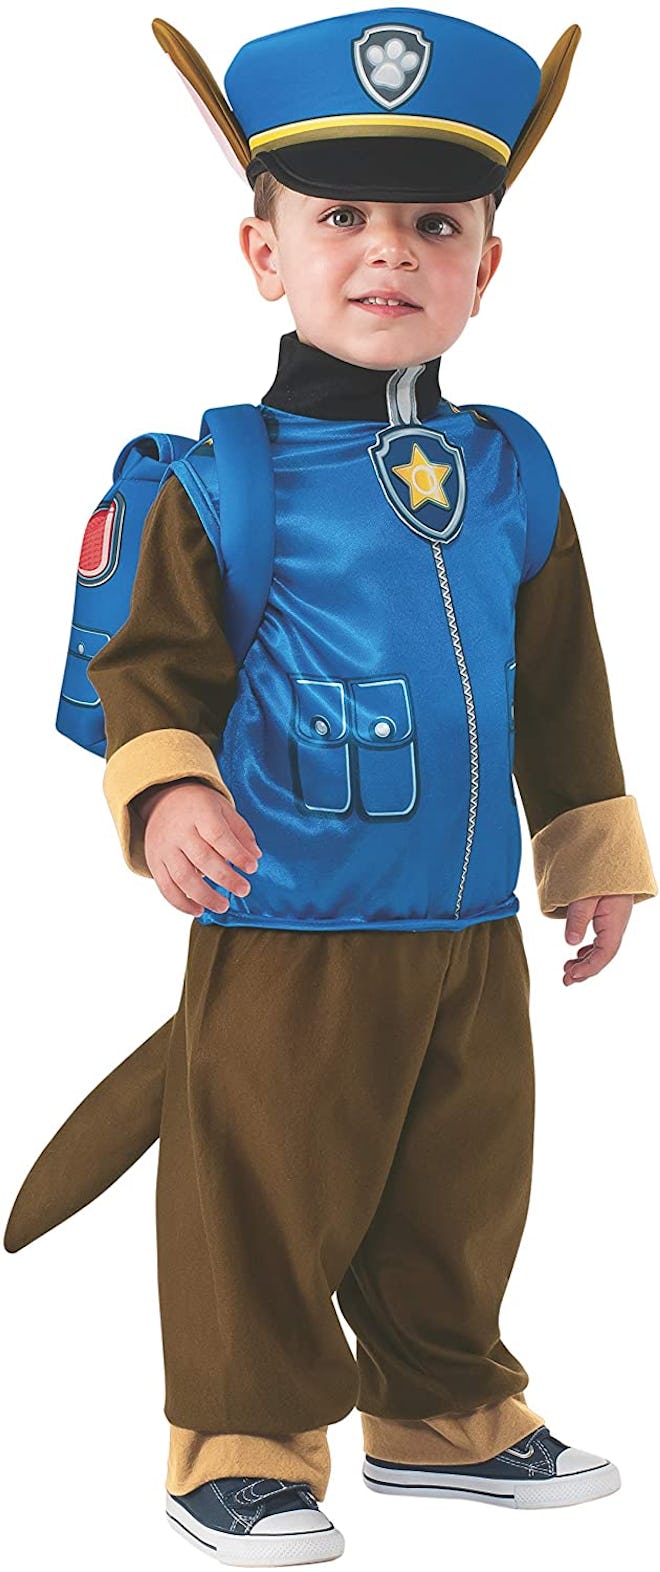 Toddler wearing a Chase costume from "Paw Patrol"